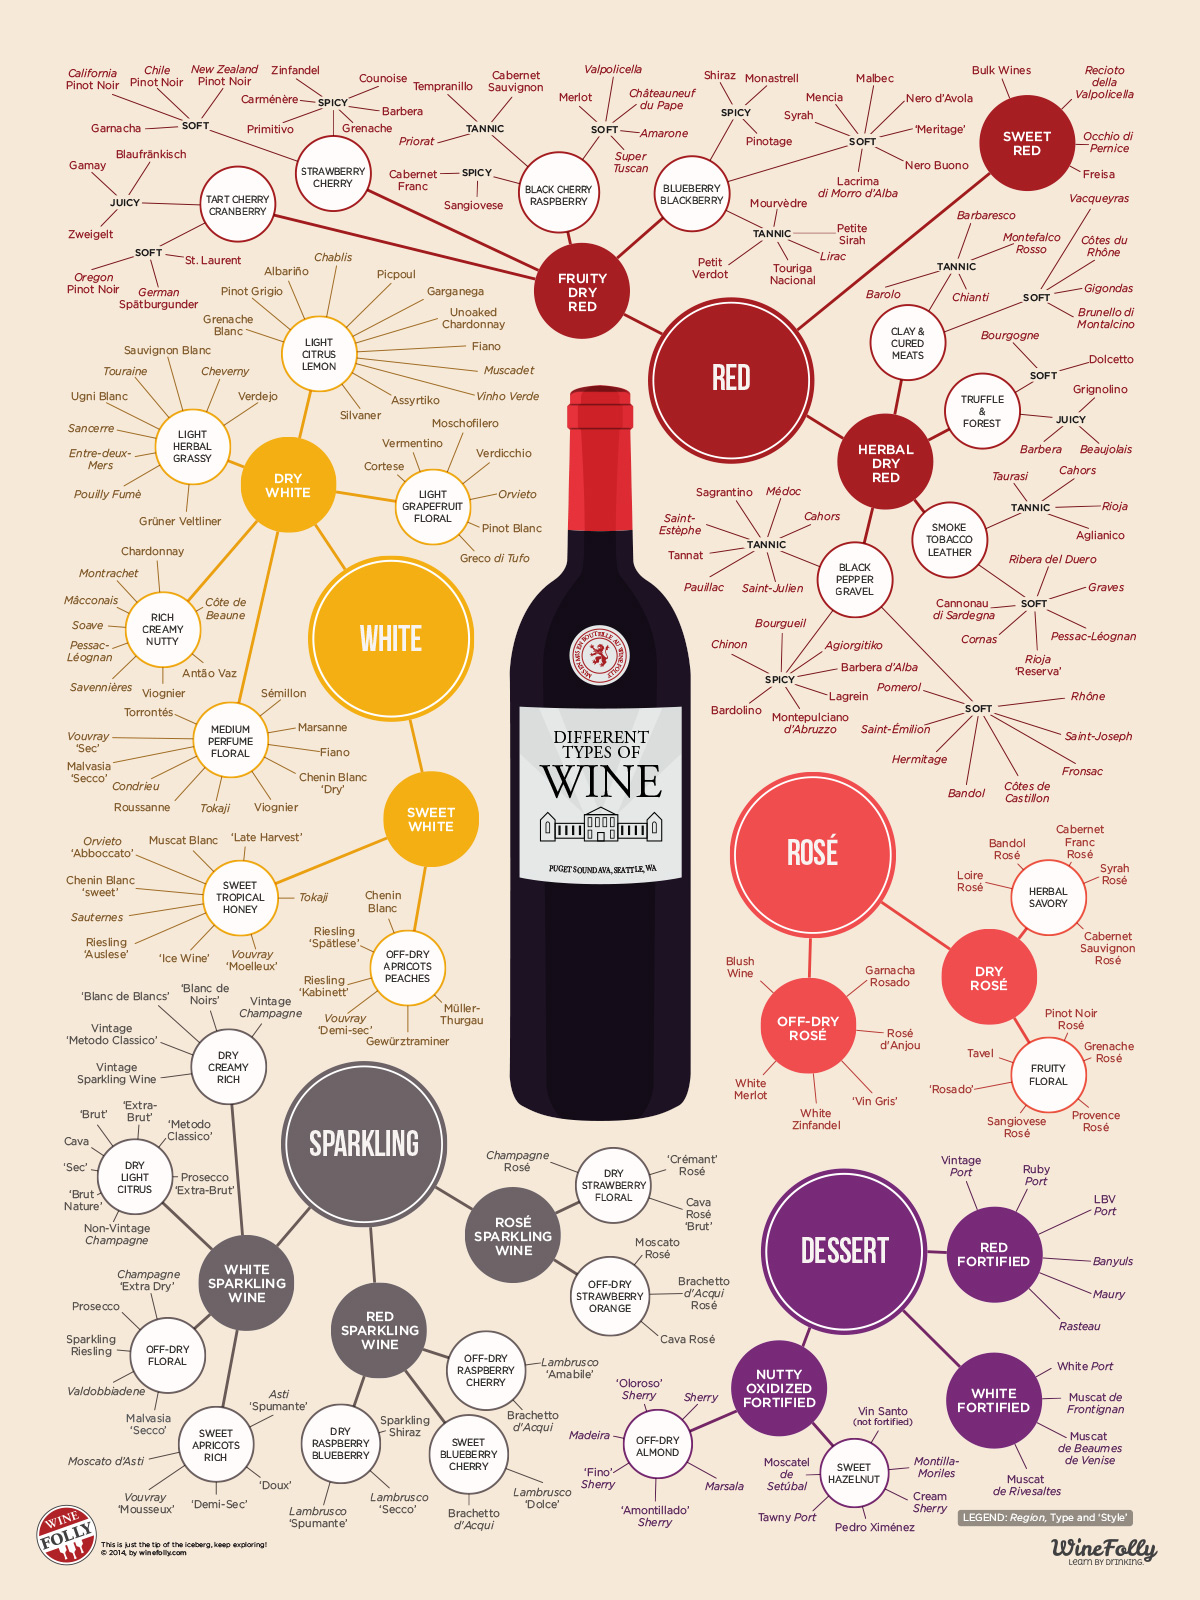 Different Types of Wine - Updated